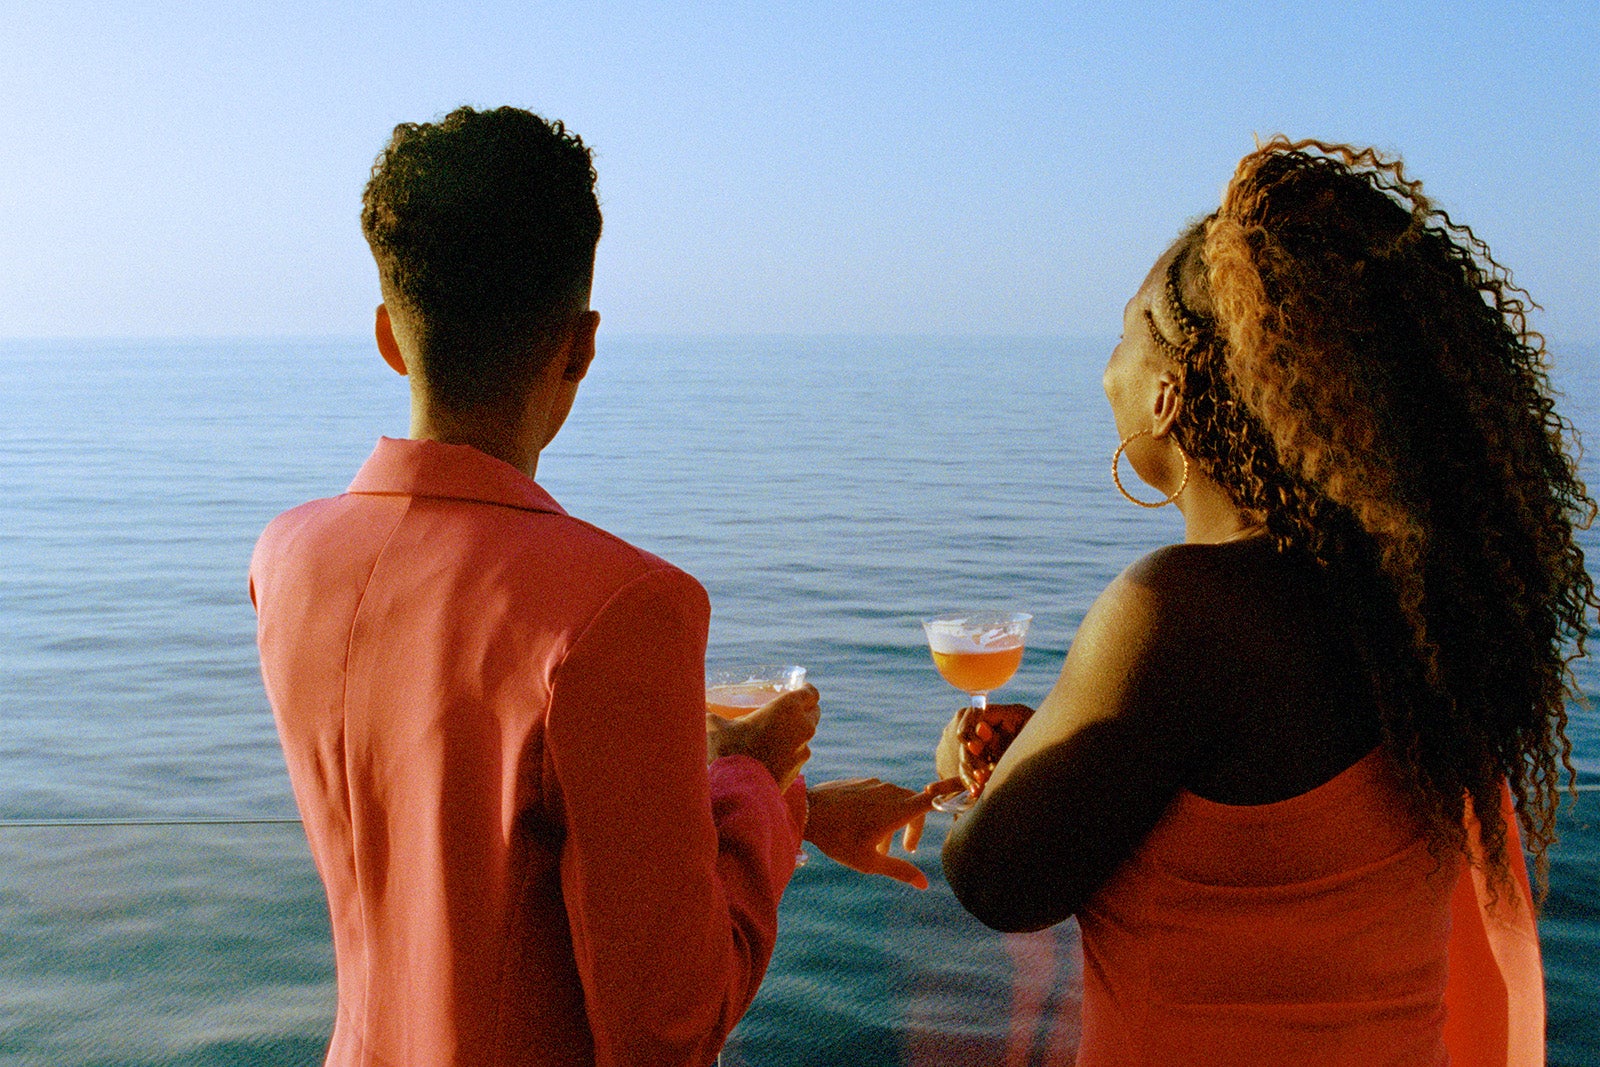 what cruises offer all inclusive alcohol